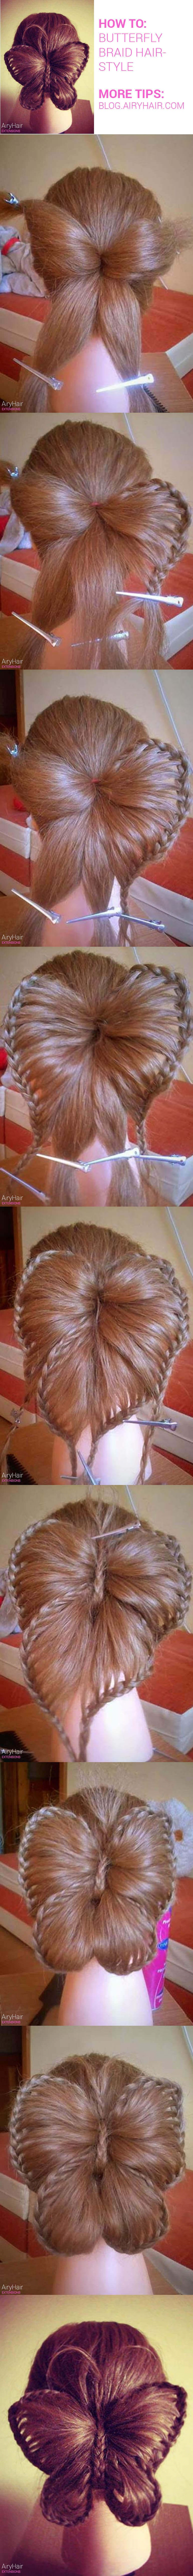 Step by Step: Butterfly Braid Hairstyle